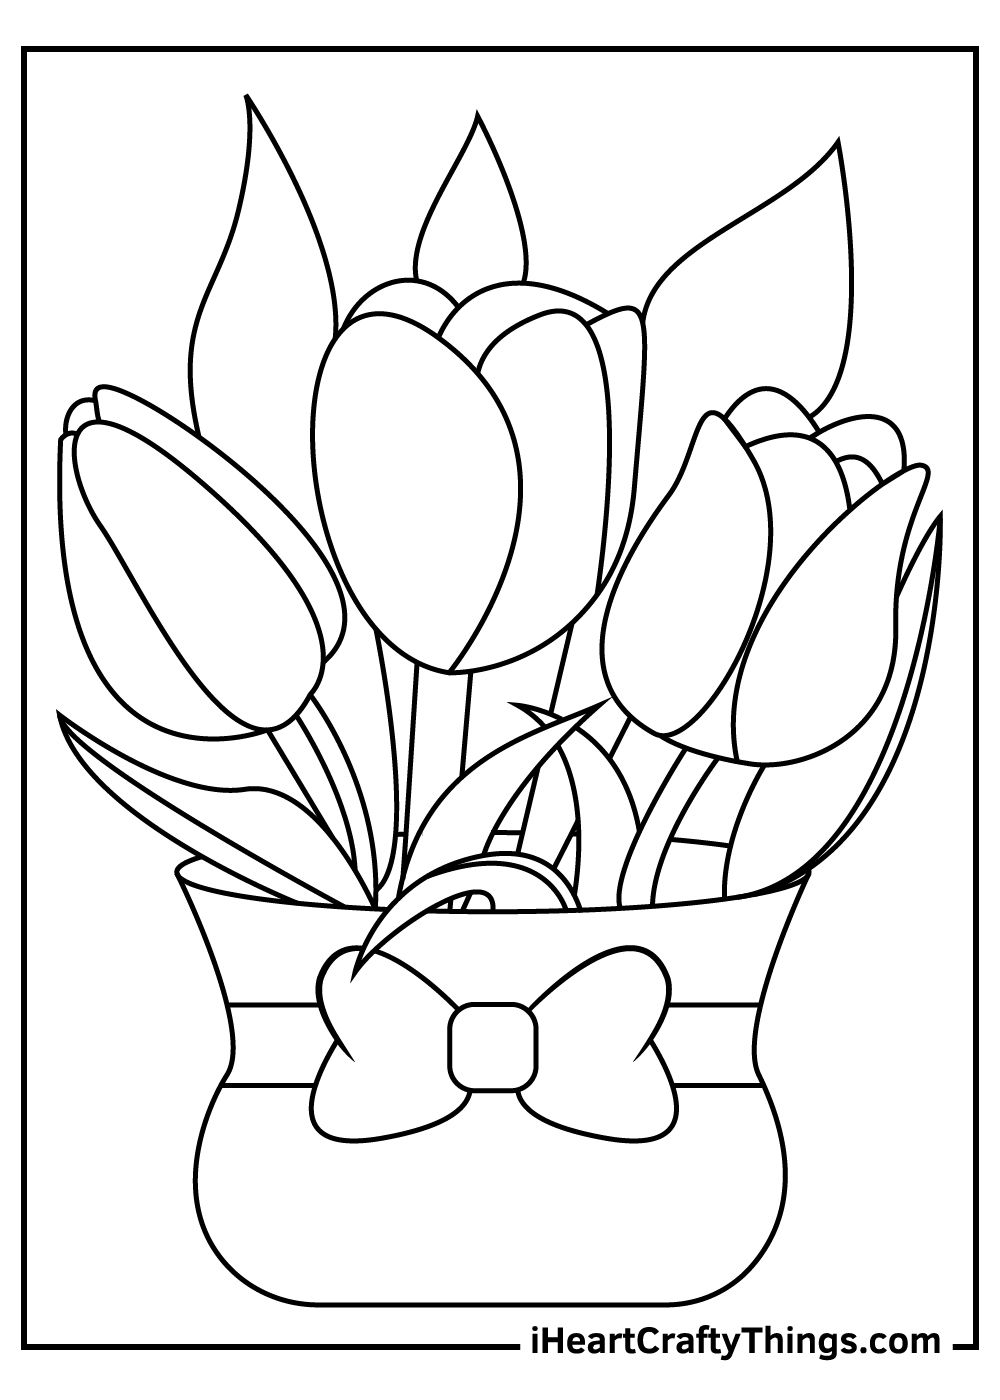 Tulip coloring pages spring coloring sheets flower coloring pages flower coloring sheets